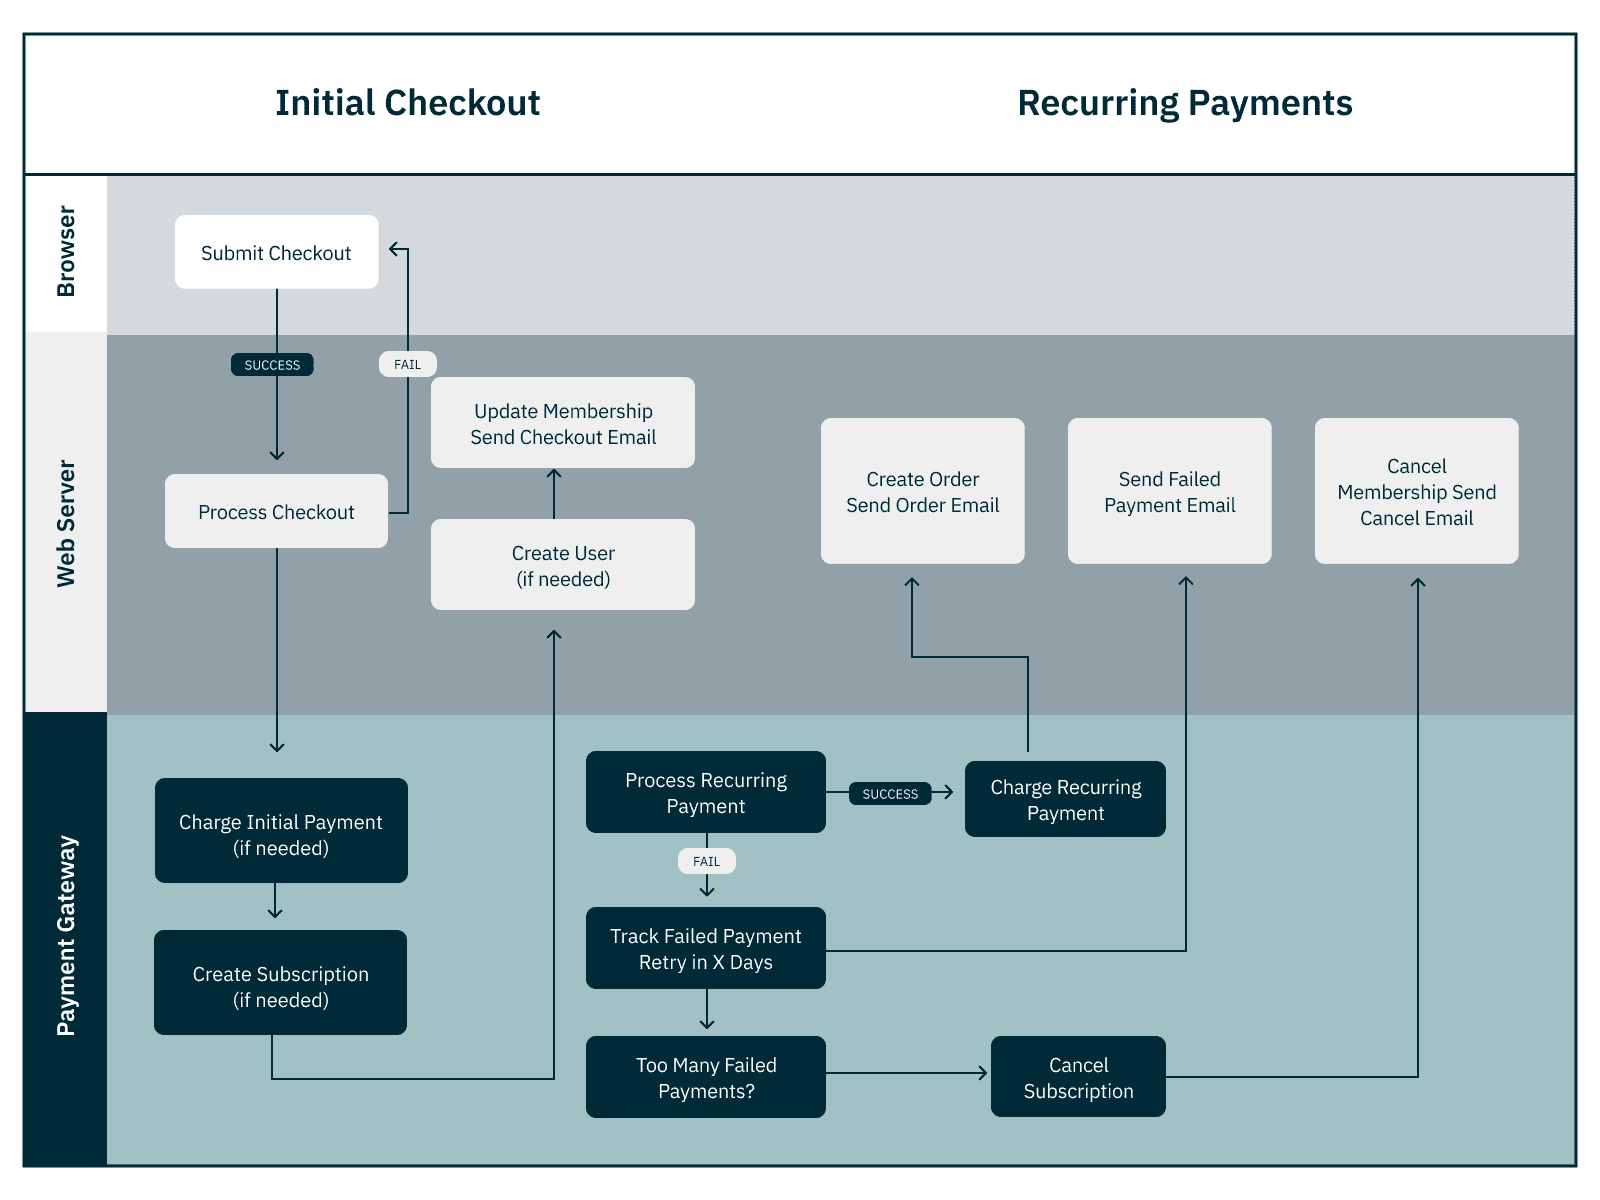 How recurring revenues are collected with payment gateways